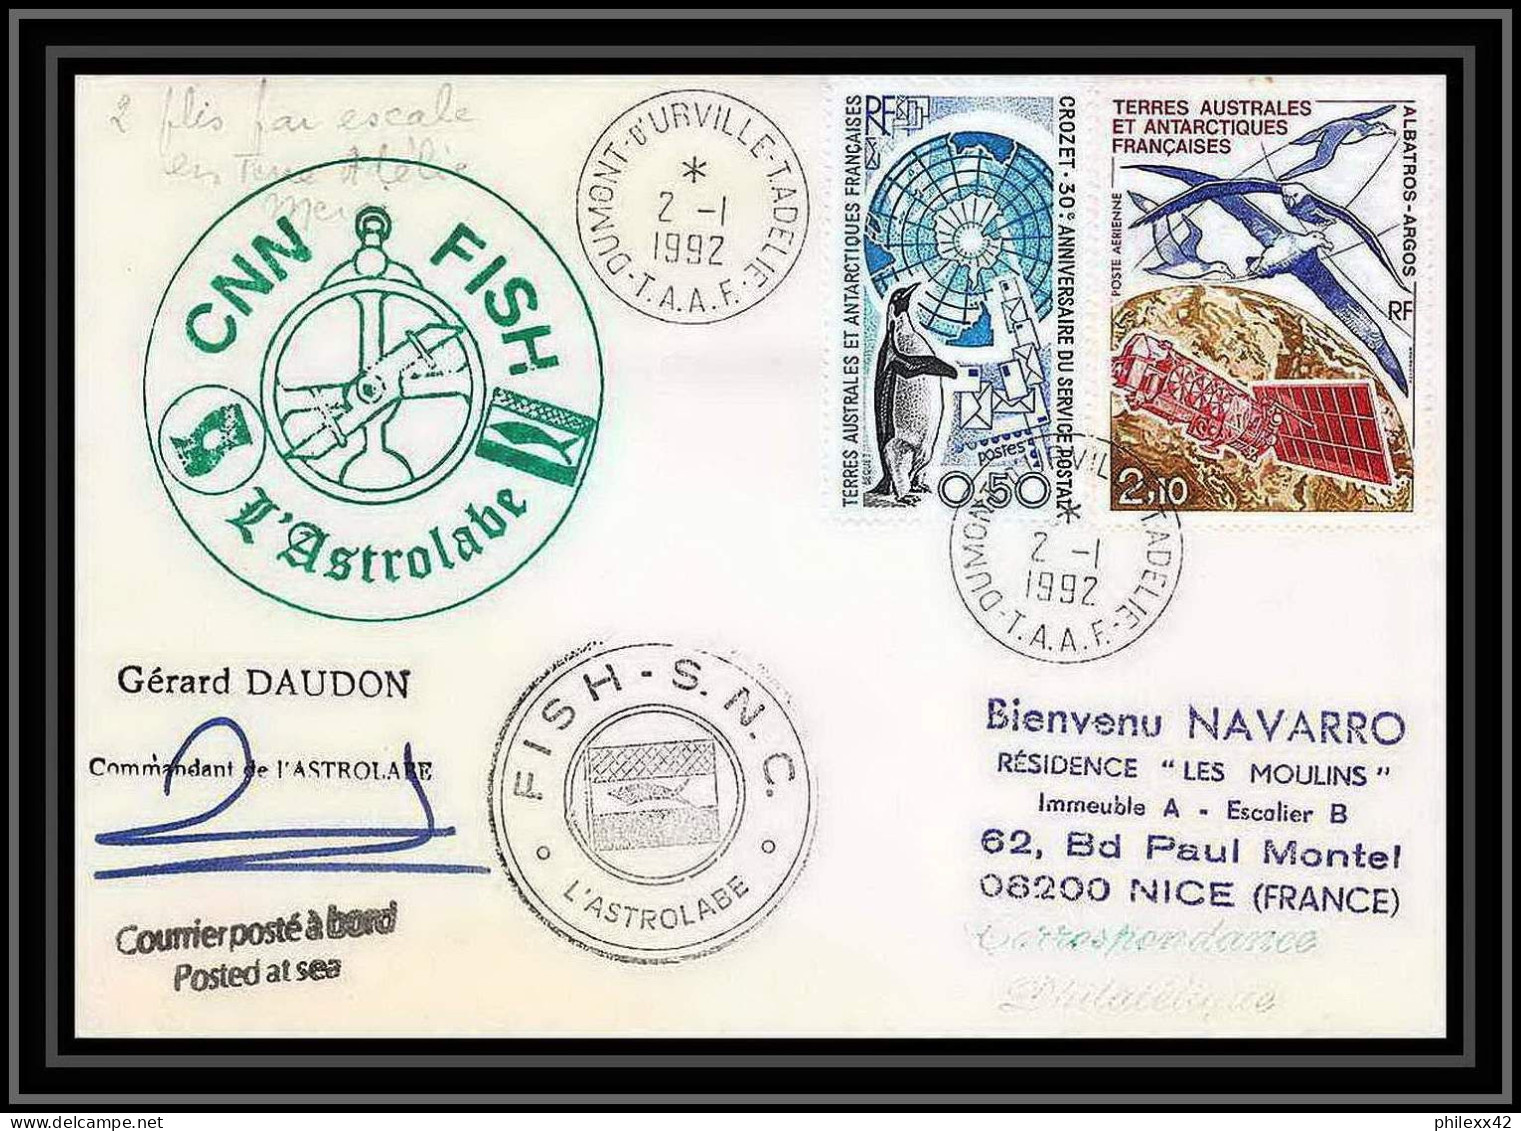 1806 Astrobale Signé Signed Daudon 2/1/1992 TAAF Antarctic Terres Australes Lettre (cover) - Antarktis-Expeditionen